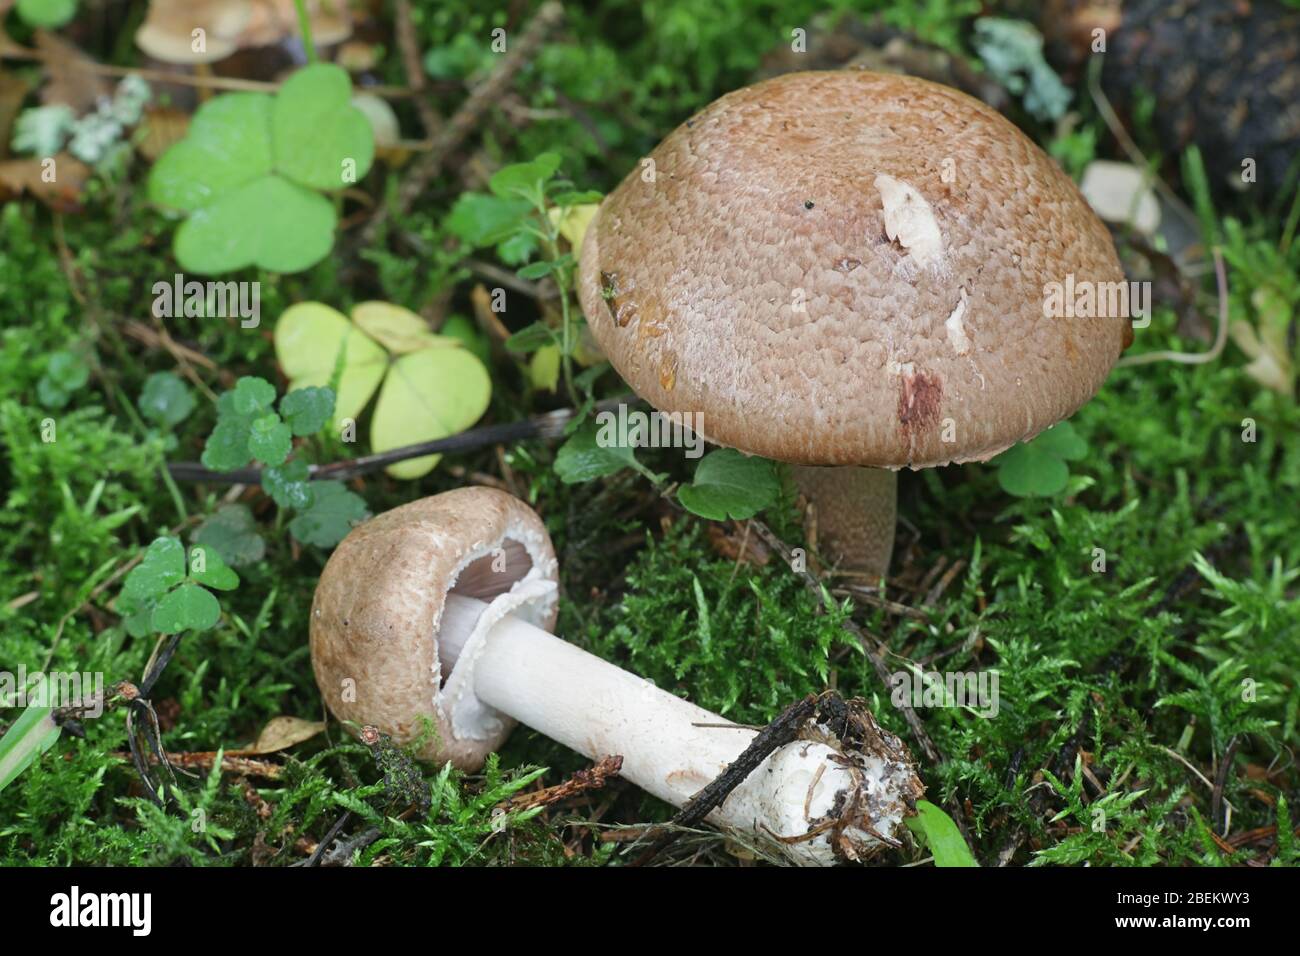 Agaricus silvaticus (or Agaricus sylvaticus), known as the scaly wood mushroom, blushing wood mushroom, or pinewood mushroom, delicious wild fungi fro Stock Photo